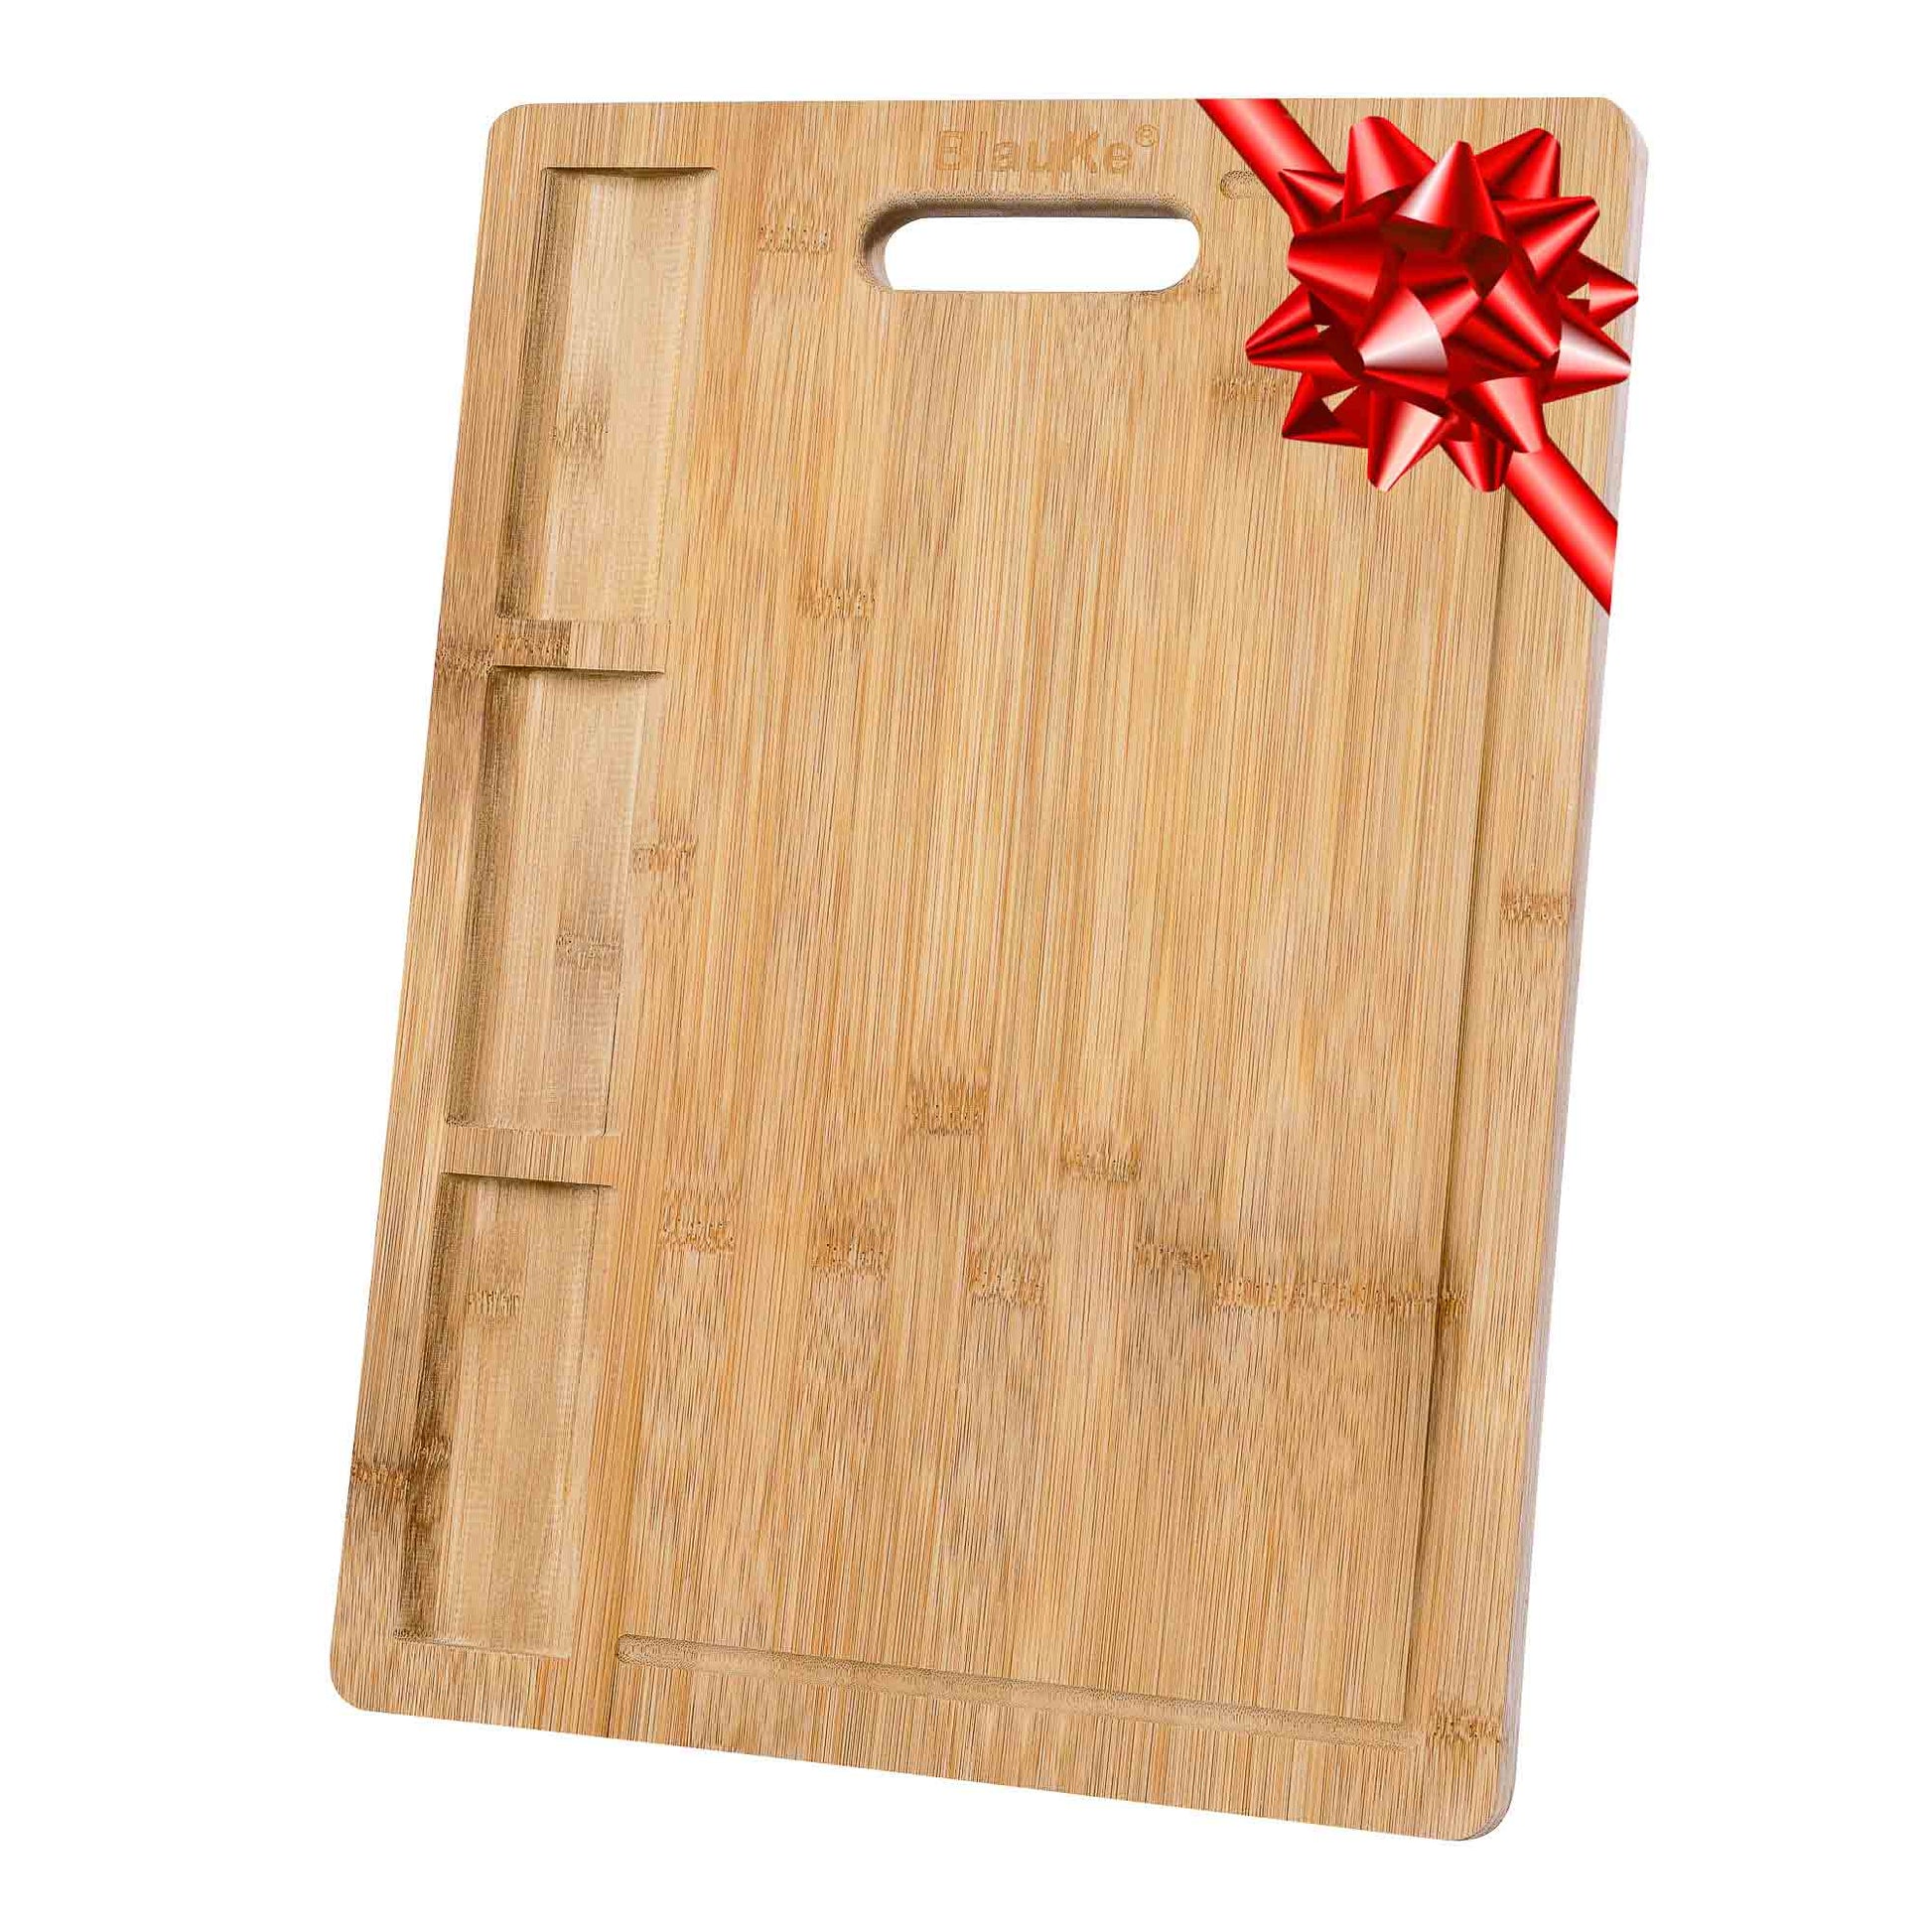 Extra Large Bamboo Cutting Board - 17x12.5 inch Wood Cutting Board for Meat, Cheese, Veggies - Wood Serving Tray with Juice Groove and 3 Compartments-0